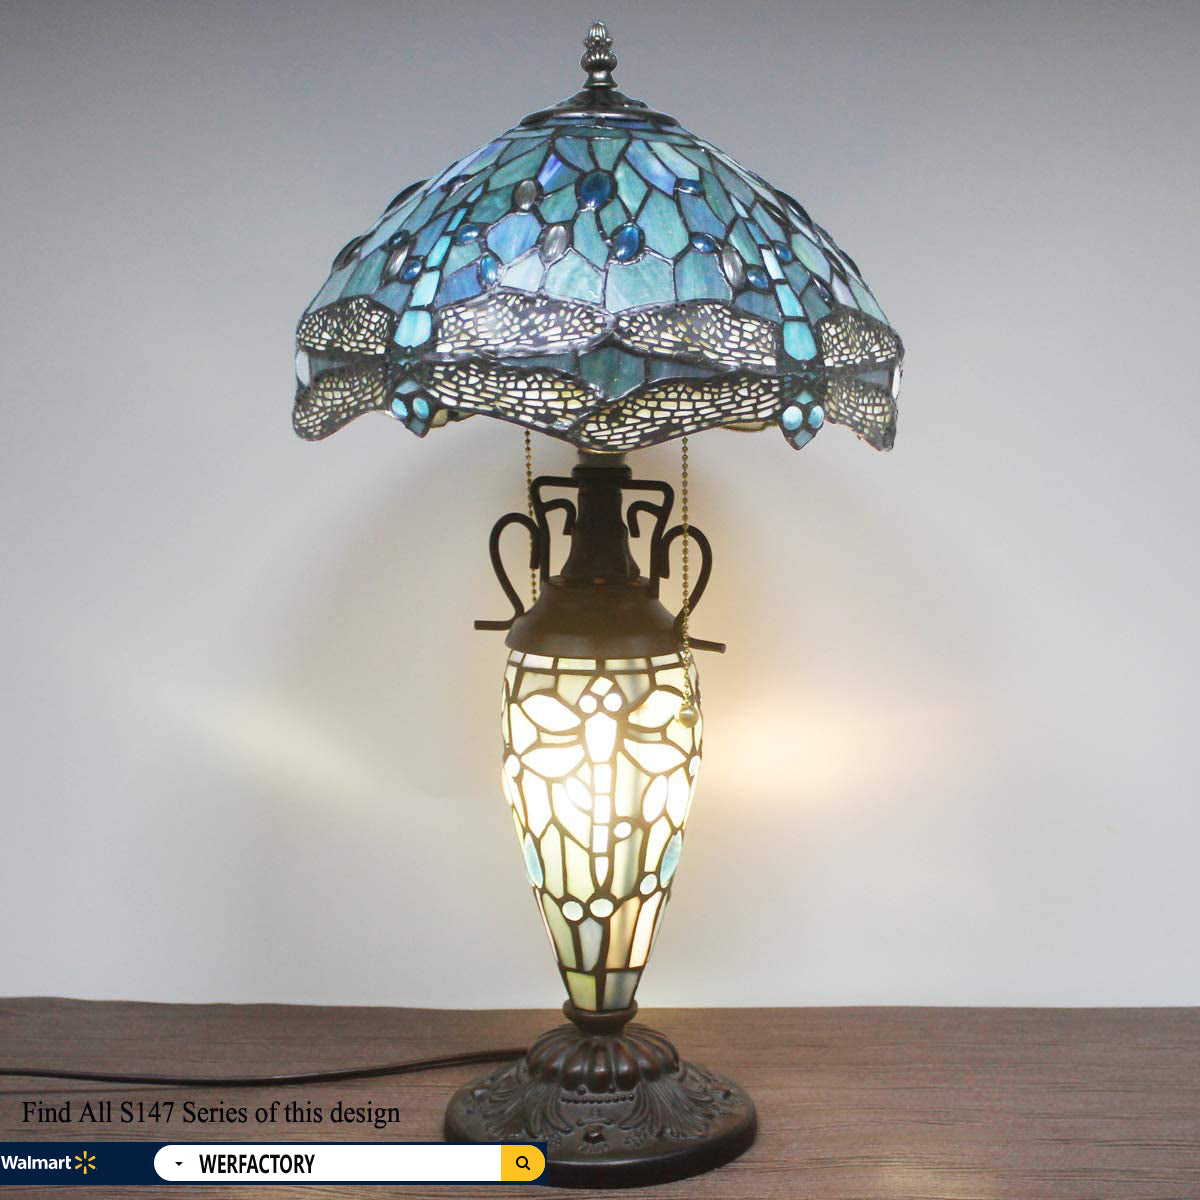 Rustic  Table Lamp with Nightlight Sea Blue Stained Glass Dragonfly Style Desk Light Vintage Base 22" Tall Living Room Bedroom Bedside Nightstand Home Office Family WERFACTORY Led Bulb Included